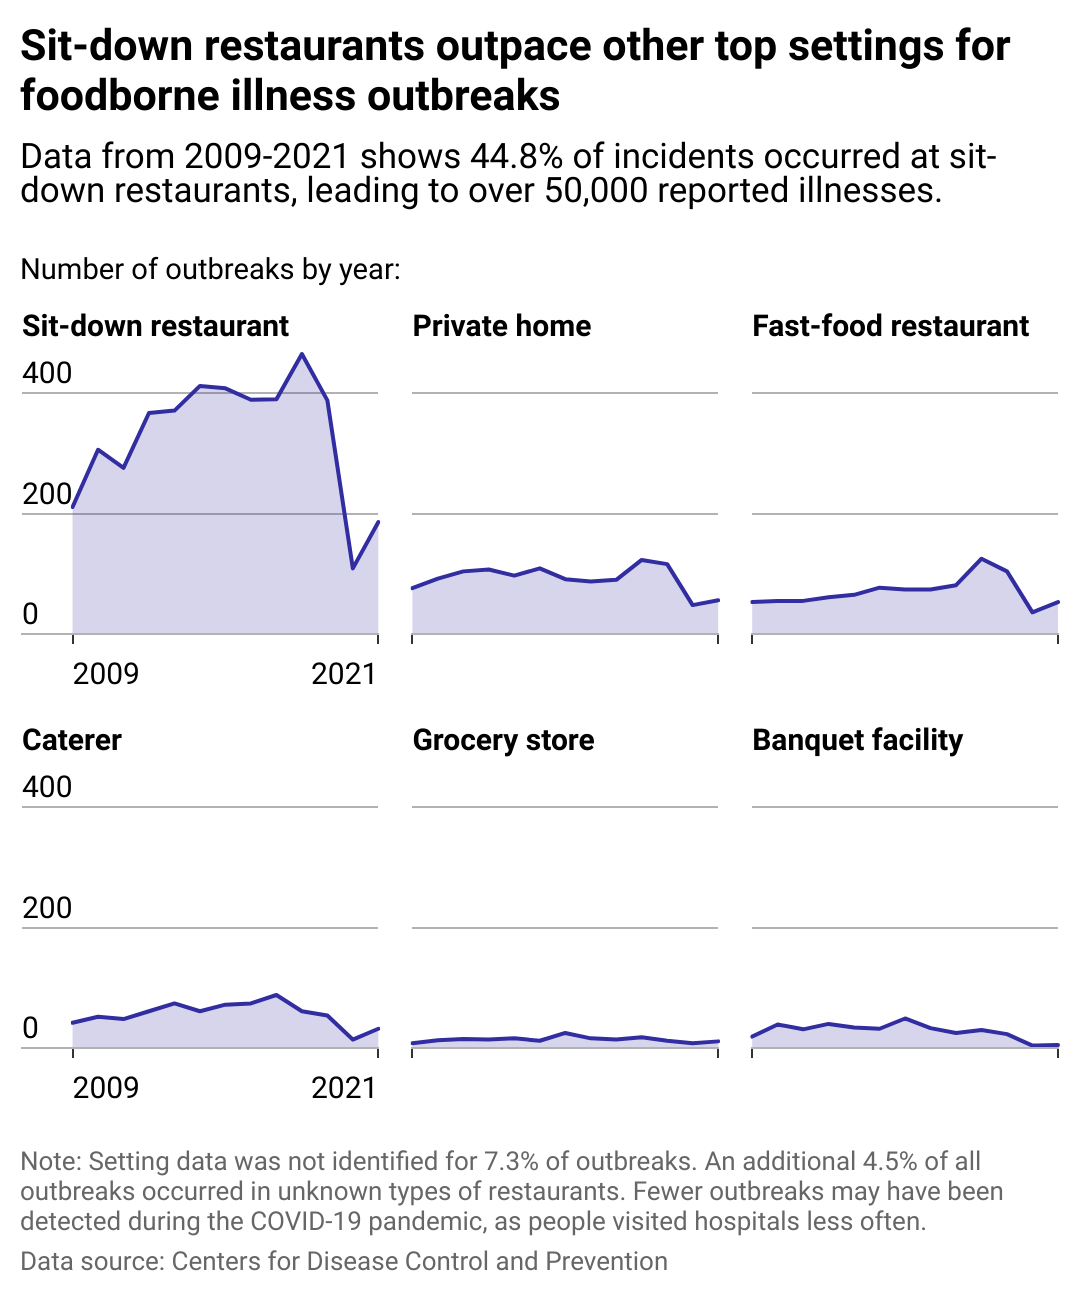 Multiple line charts showing sit-down restaurants outpace other top settings for foodborne illness outbreaks. Data from 2009-2021 shows 44.8% of incidents occurred in sit-down restaurants, leading to over 50,000 reported illnesses.